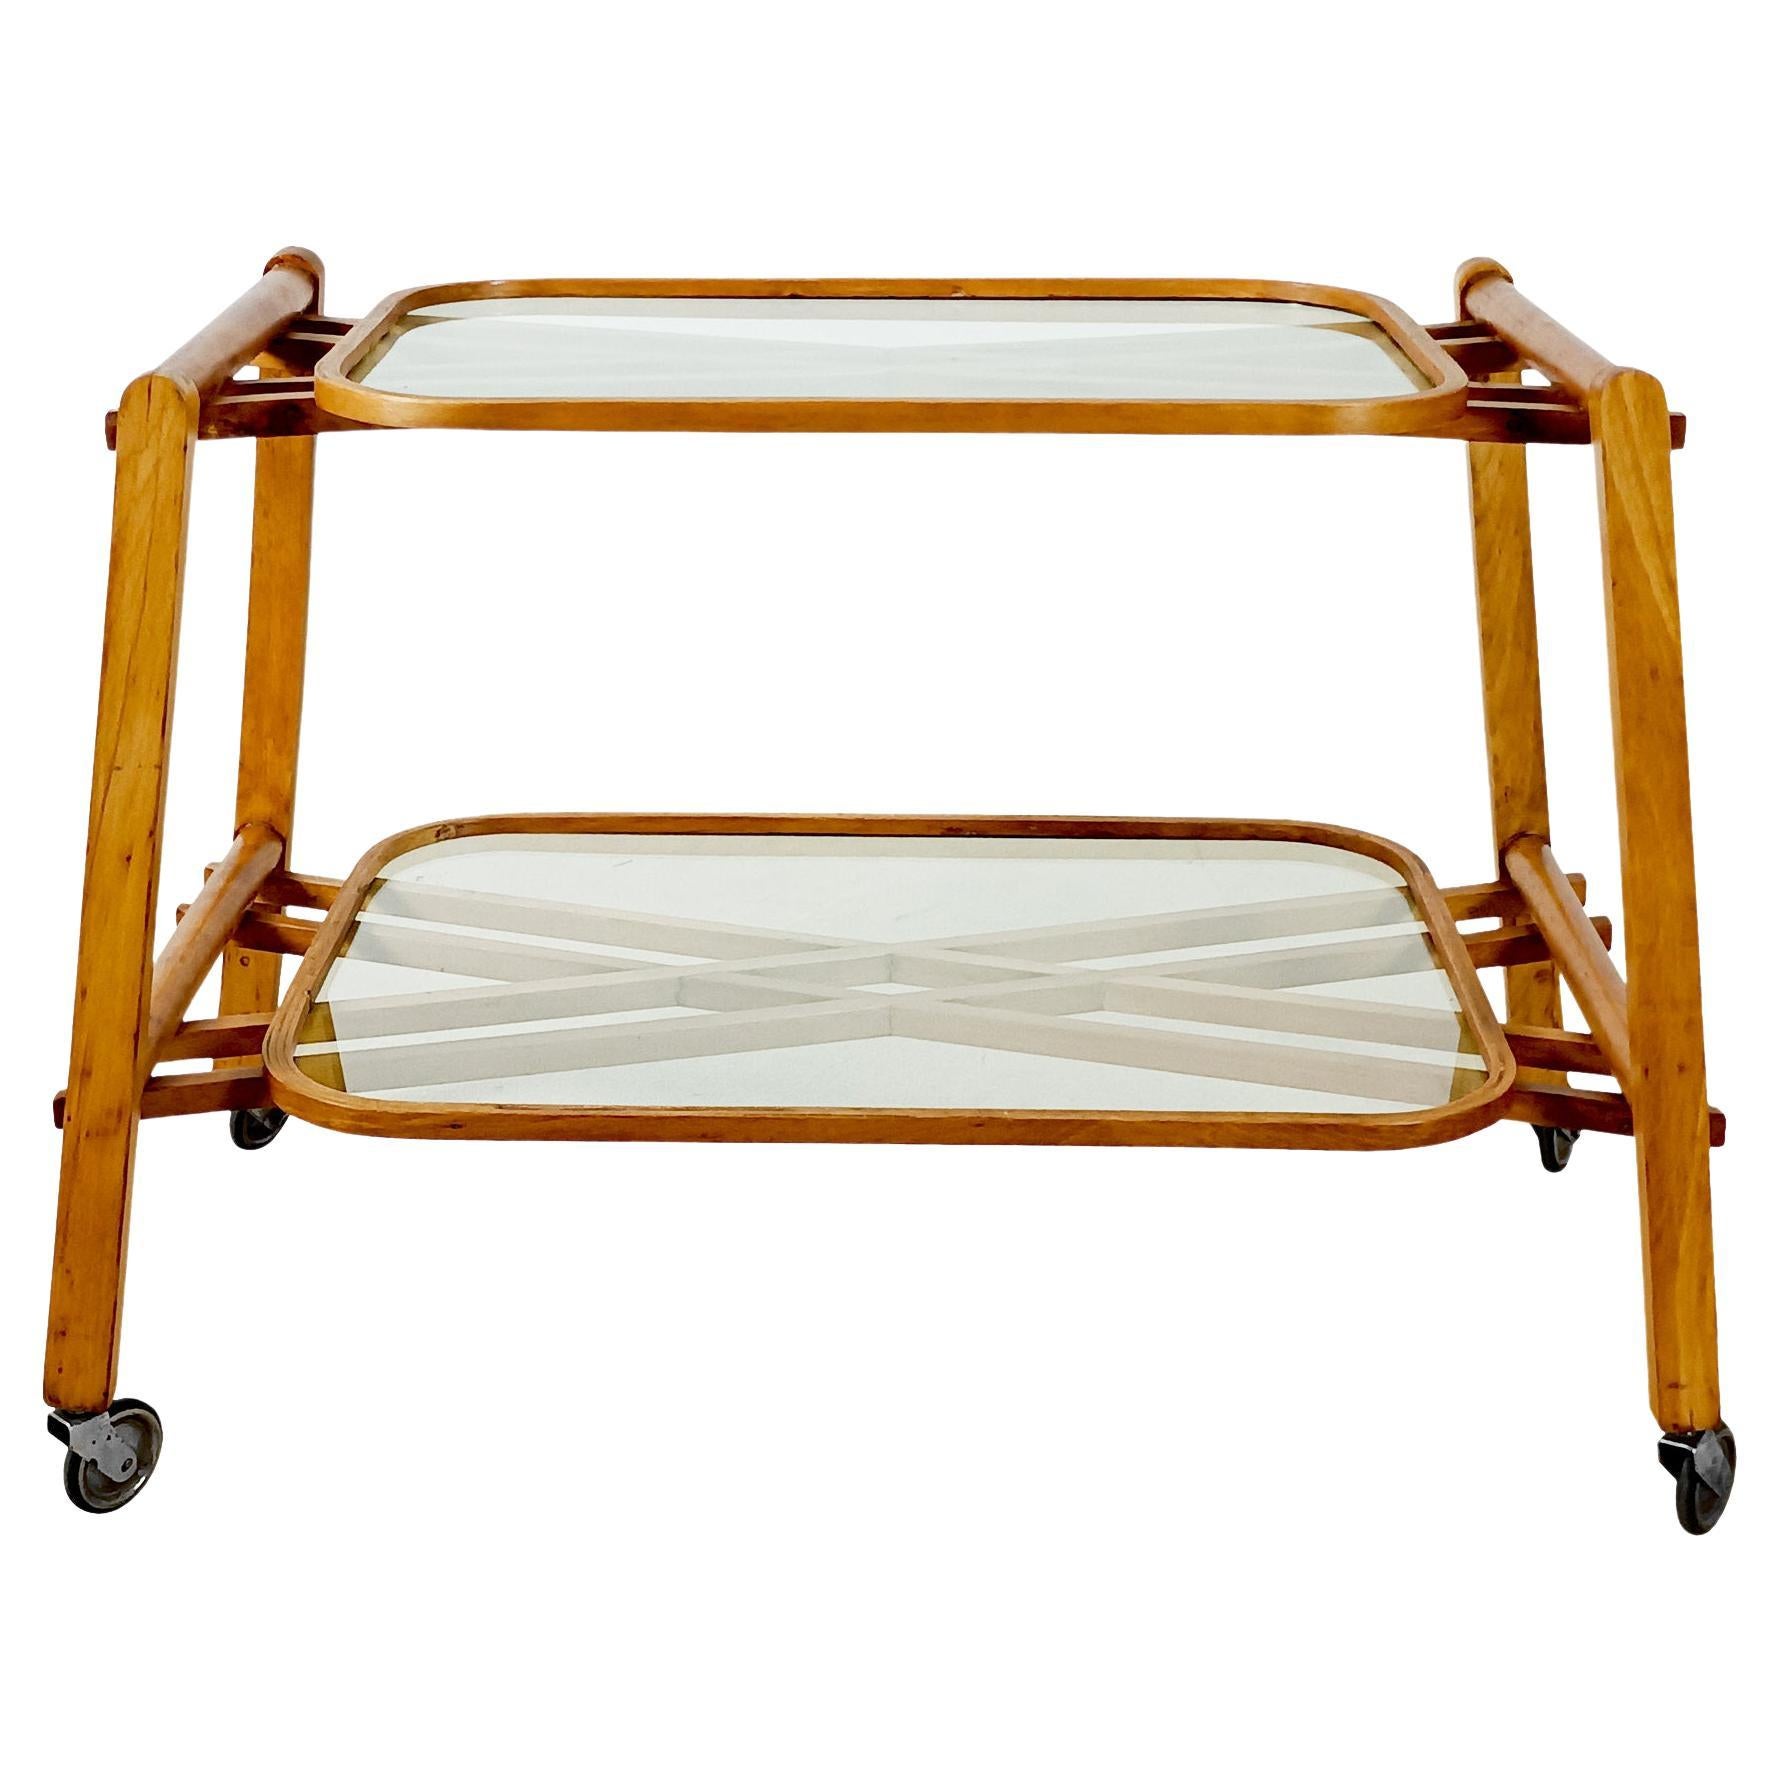 Mid-Century Modern Two-Level Serving Cart In Solid Oak And Glass - Italy 1940 For Sale